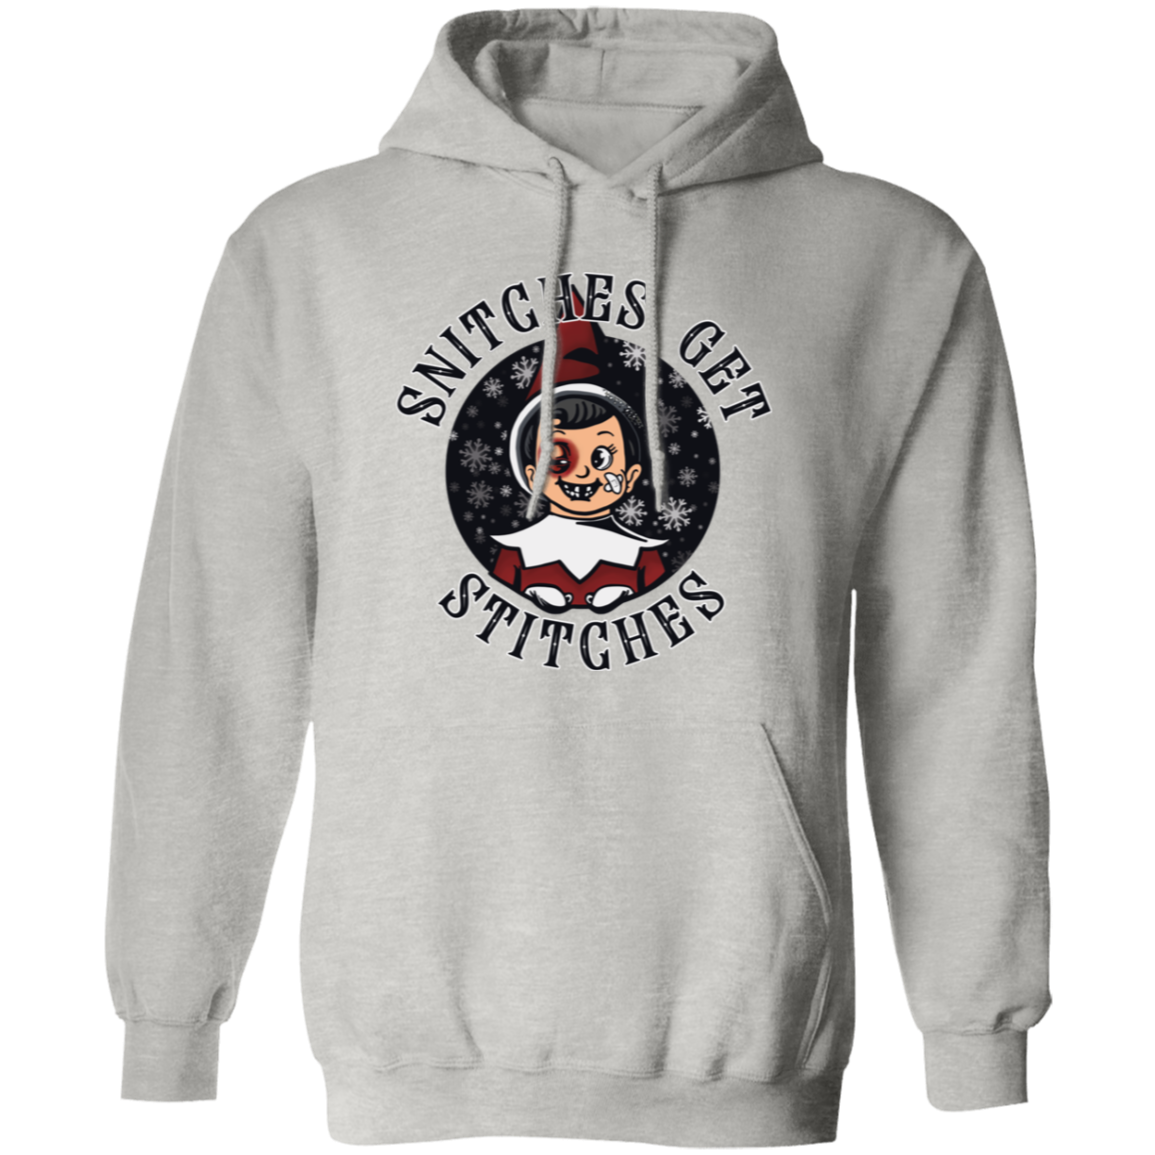 Snitches Get Stitches G185 Pullover Hoodie